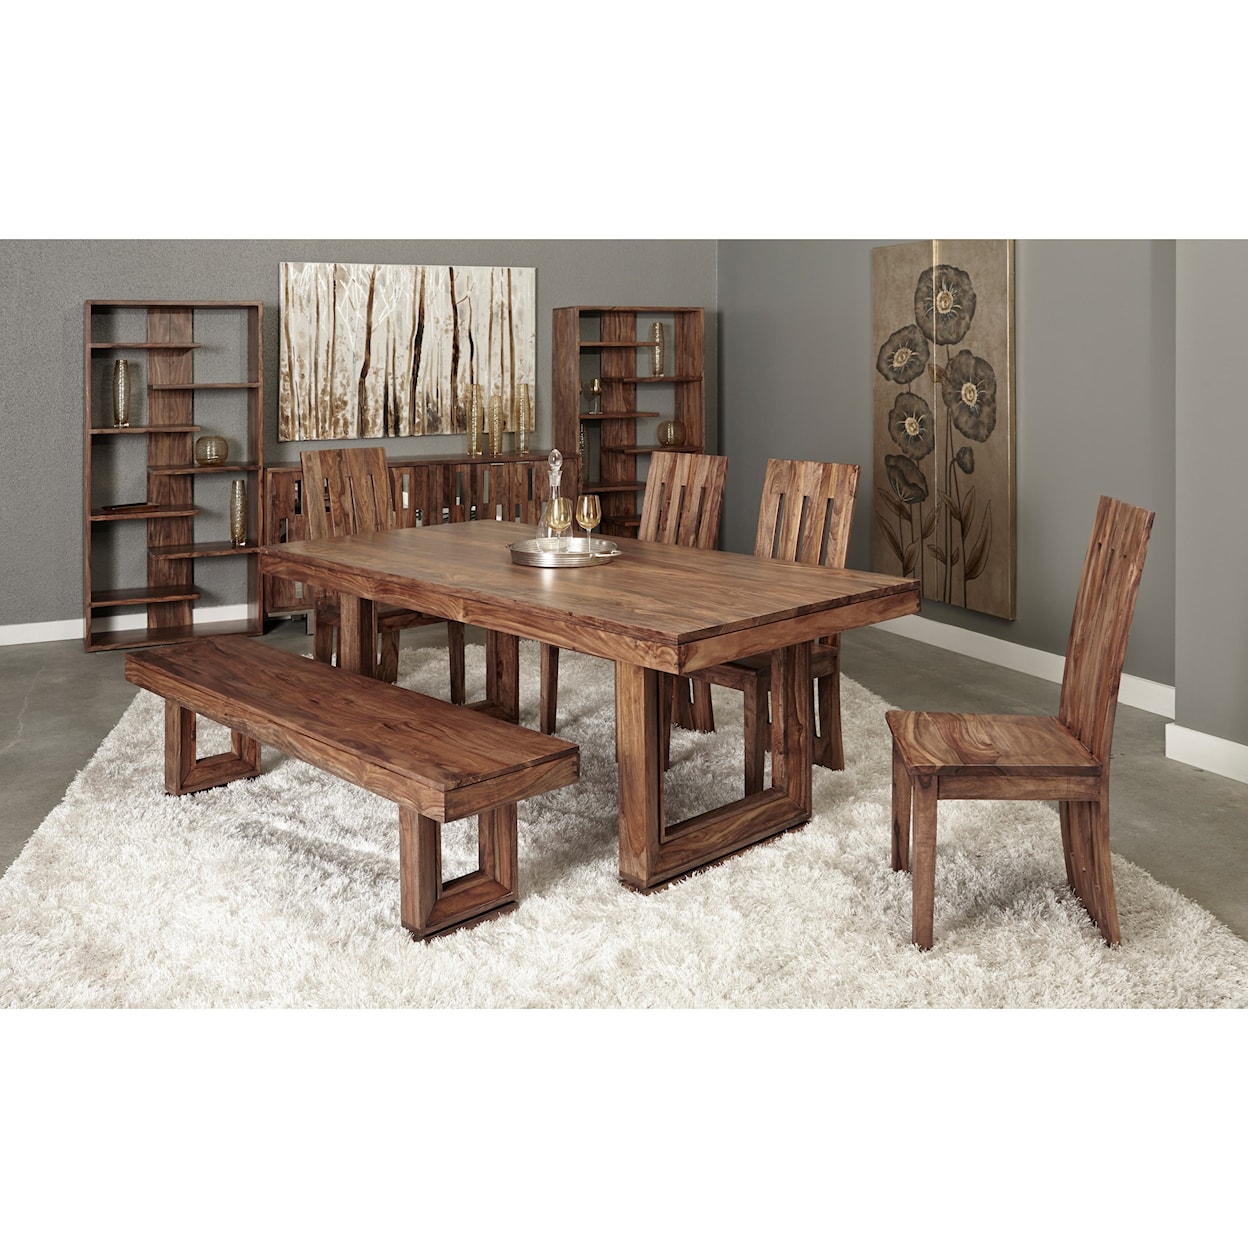 Carolina Accent Brownstone Dining Room Group